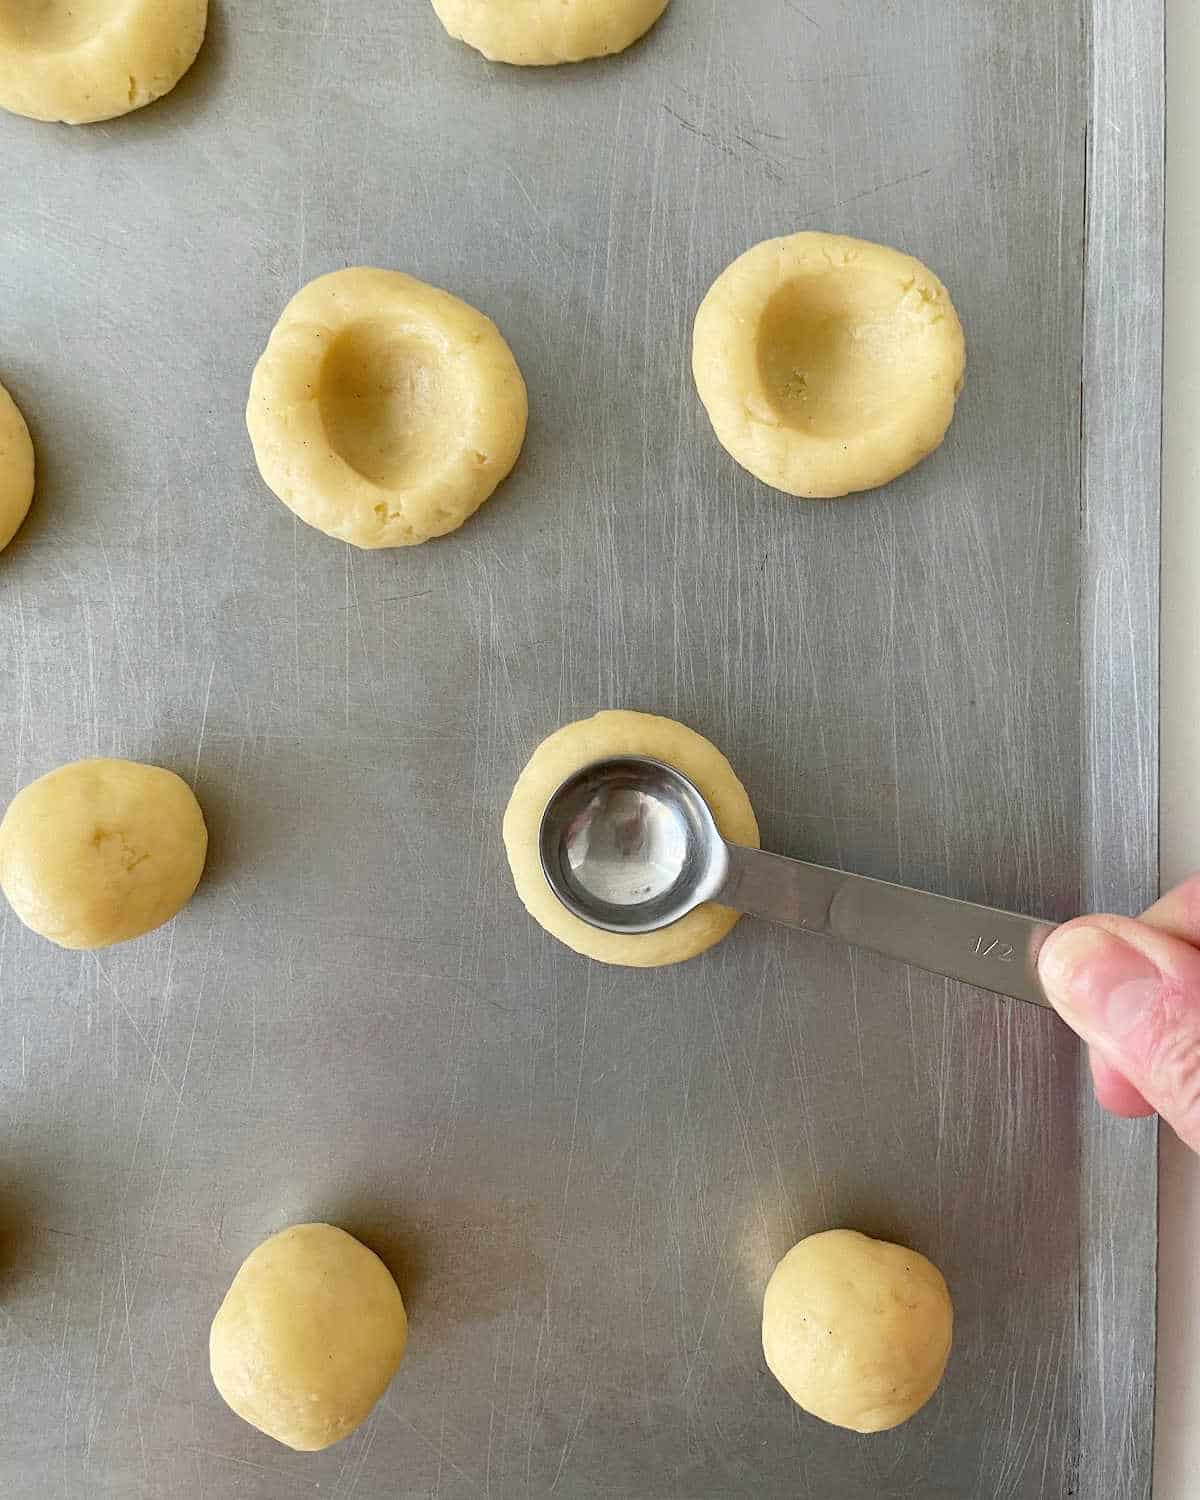 Making thumbprint indentation with a measuring spoon on cookie dough balls on a baking sheet.